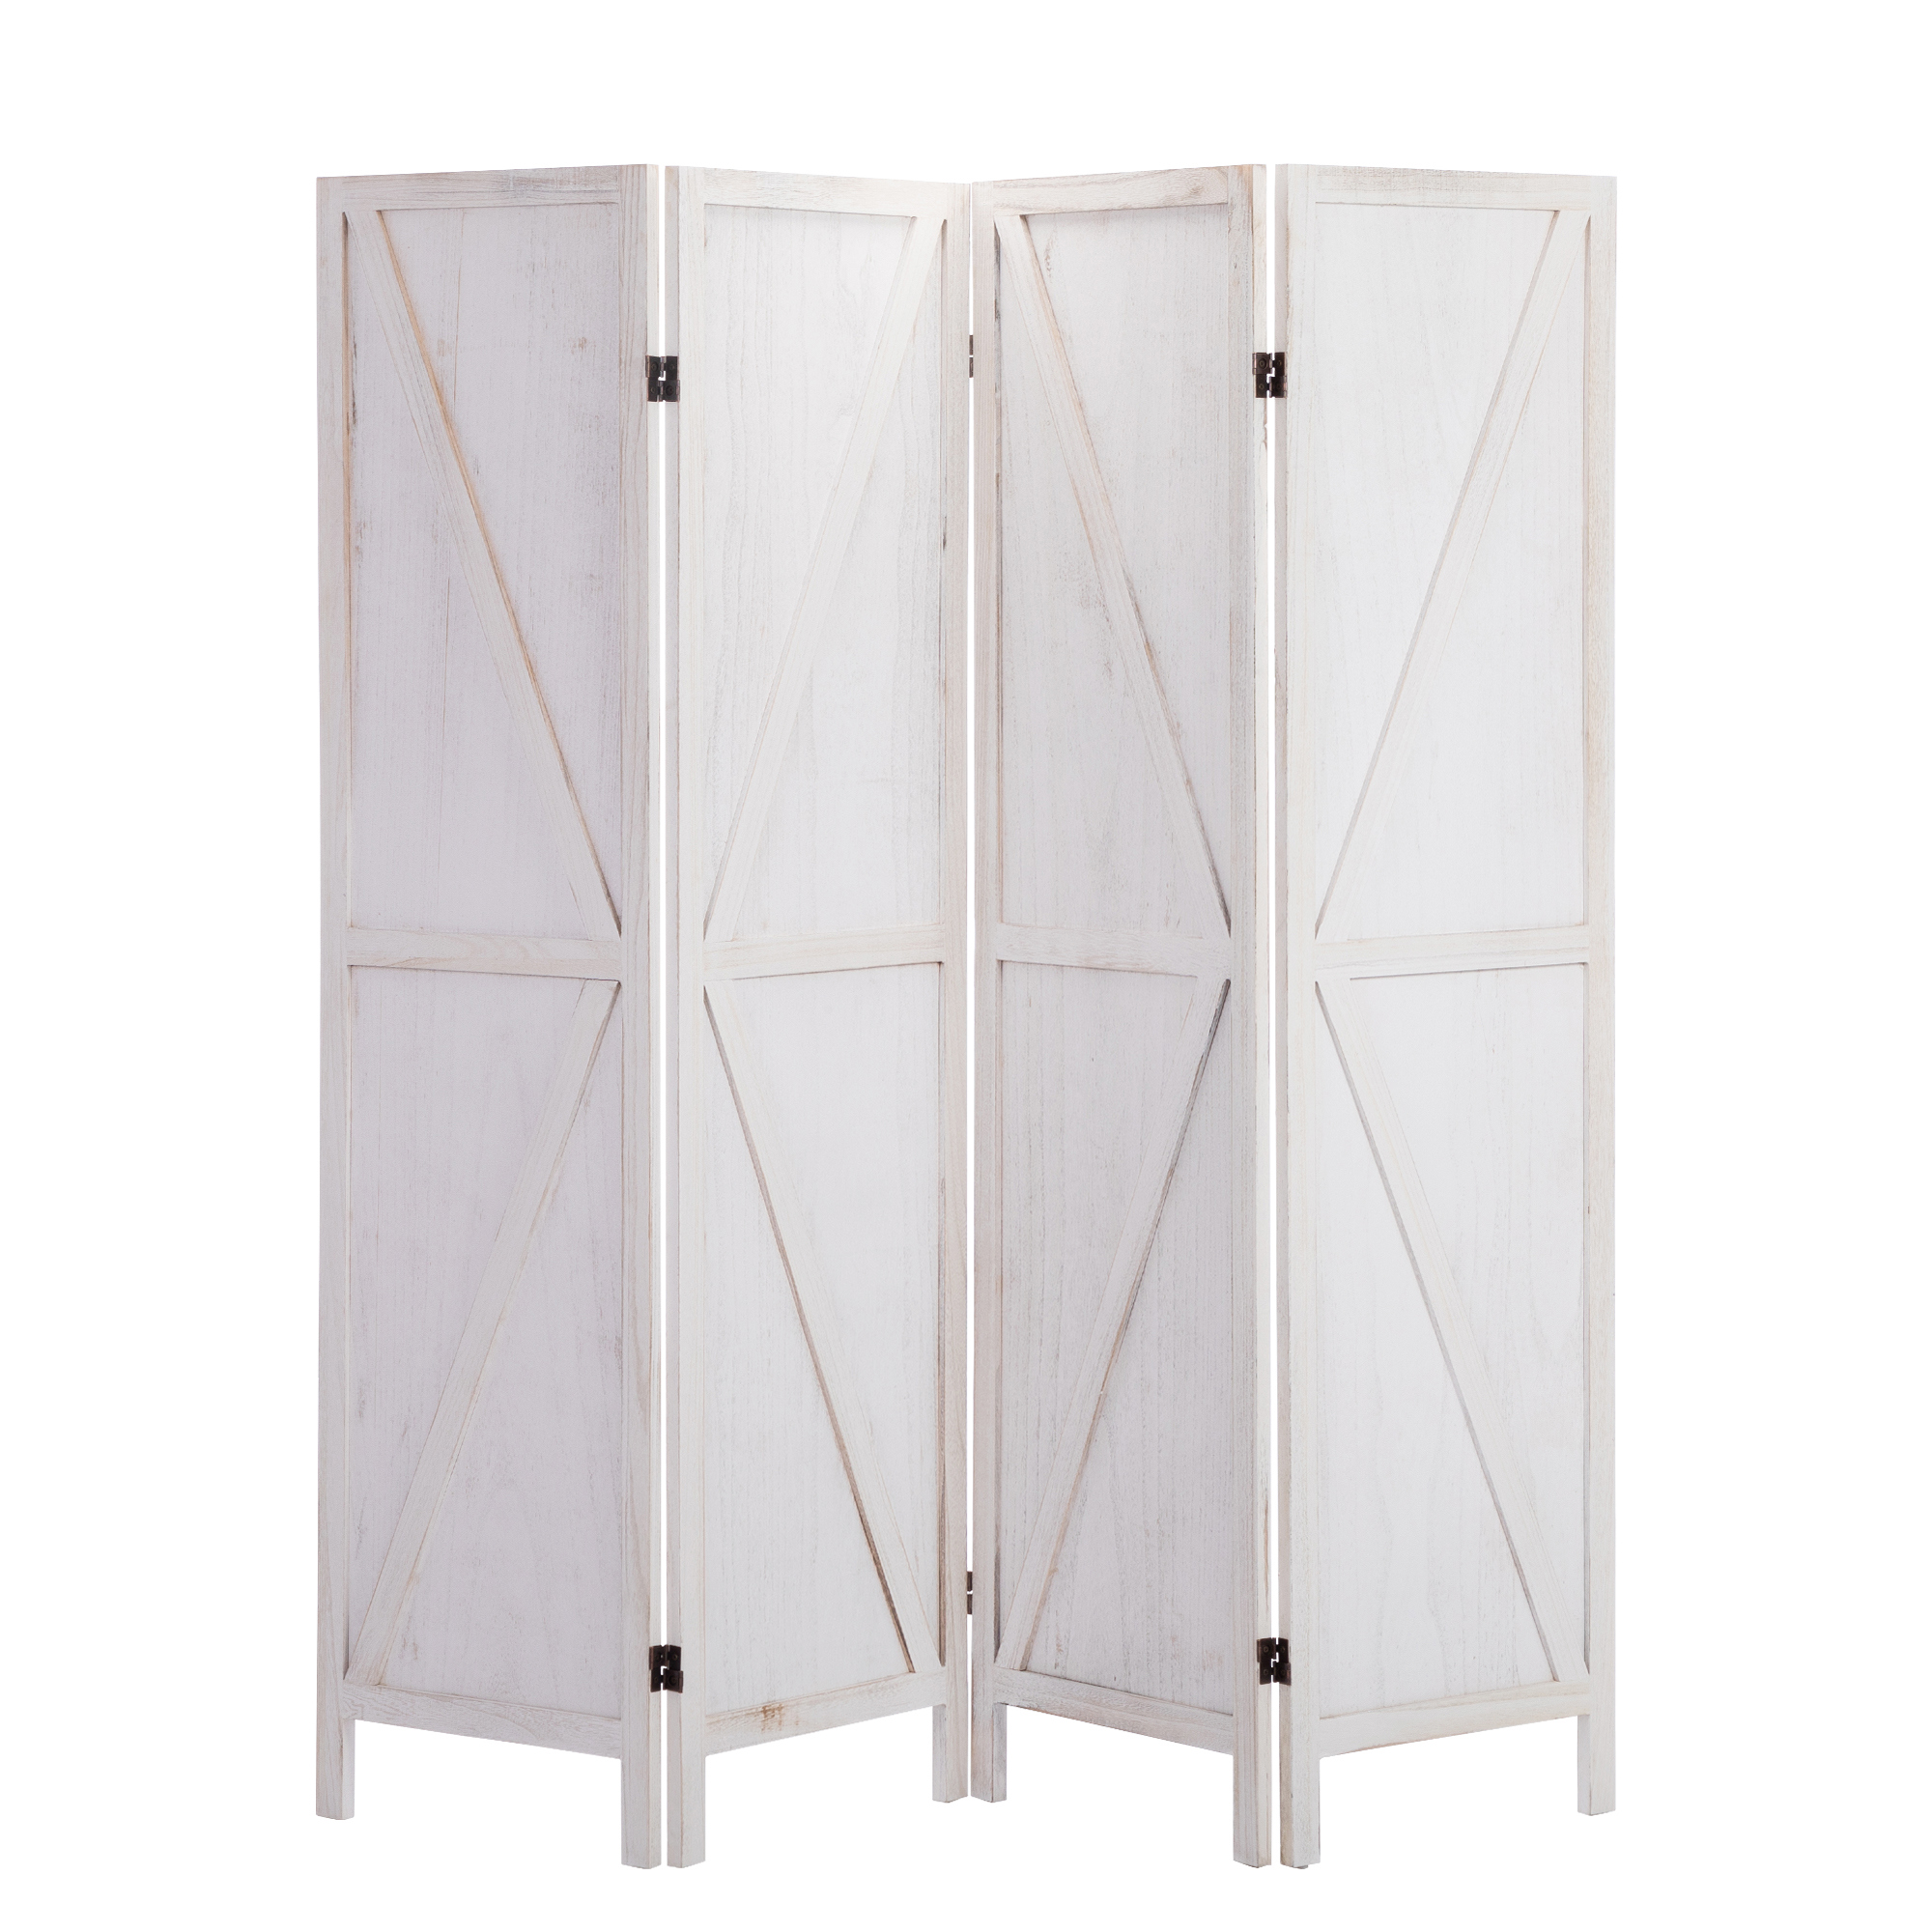 UWR-Nite Room dividers and Folding Privacy Screens, Privacy Screen, Partition Wall dividers for Rooms, Room Separator, Temporary Wall, Folding Screen - image 3 of 7